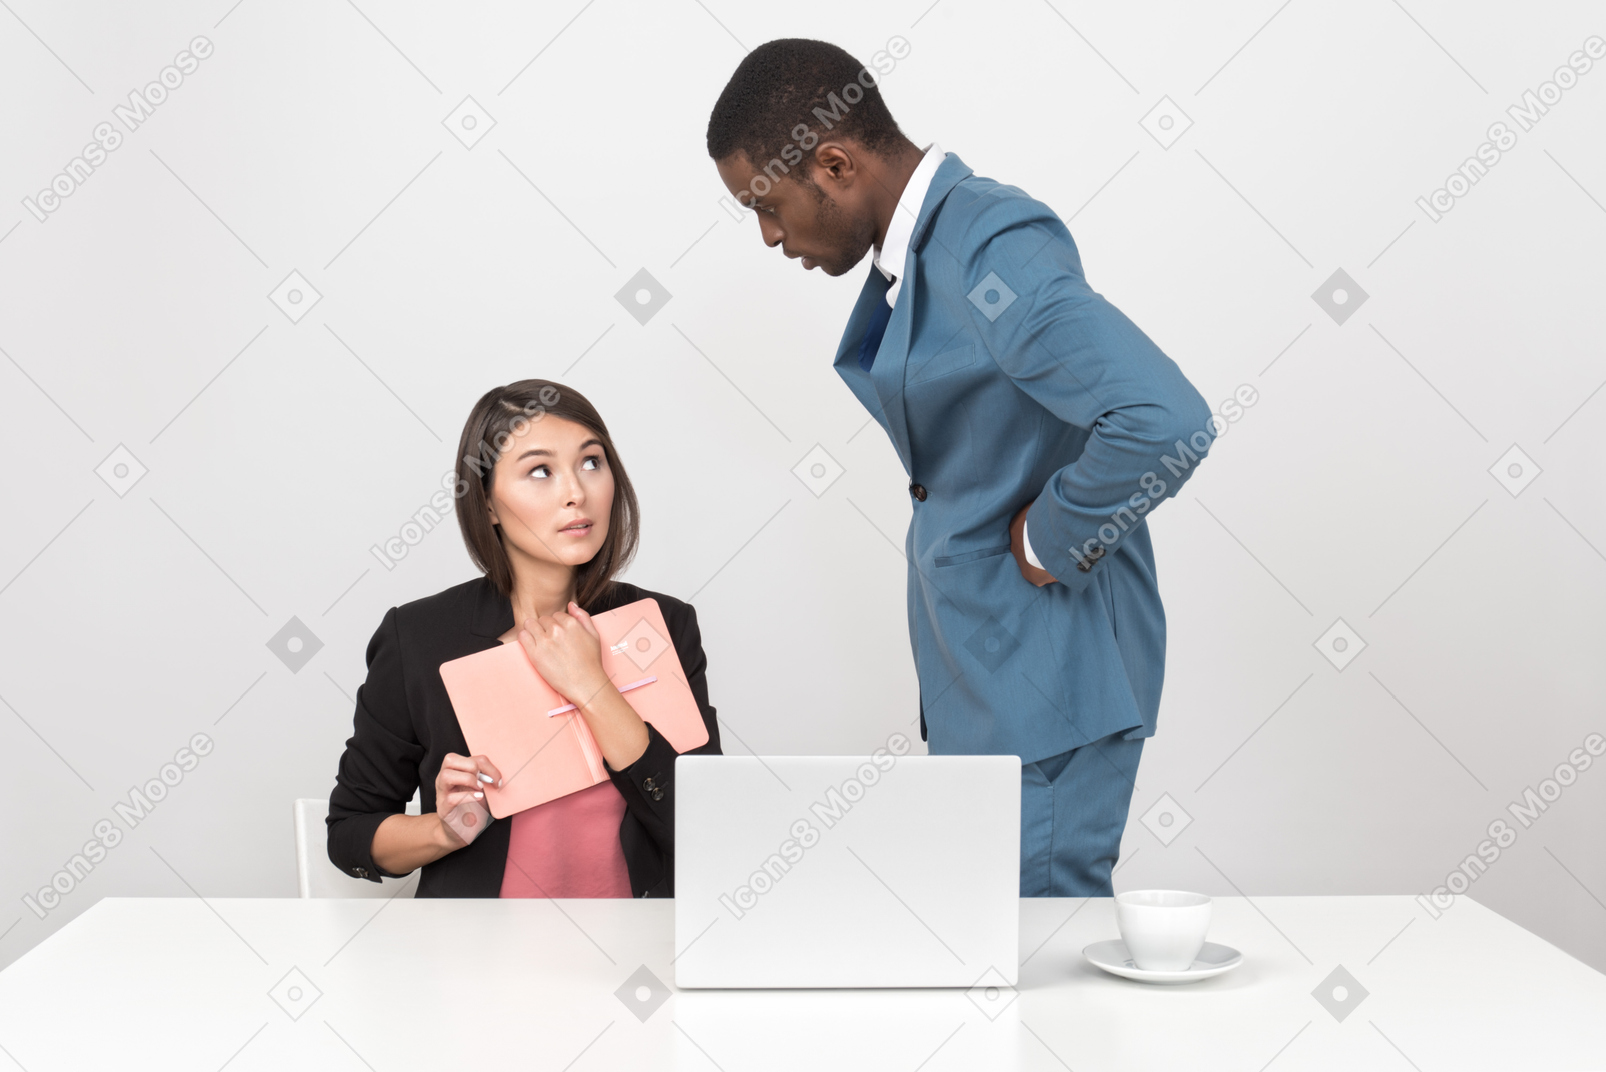 Boss is unsatisfied with employee's work and telling her off